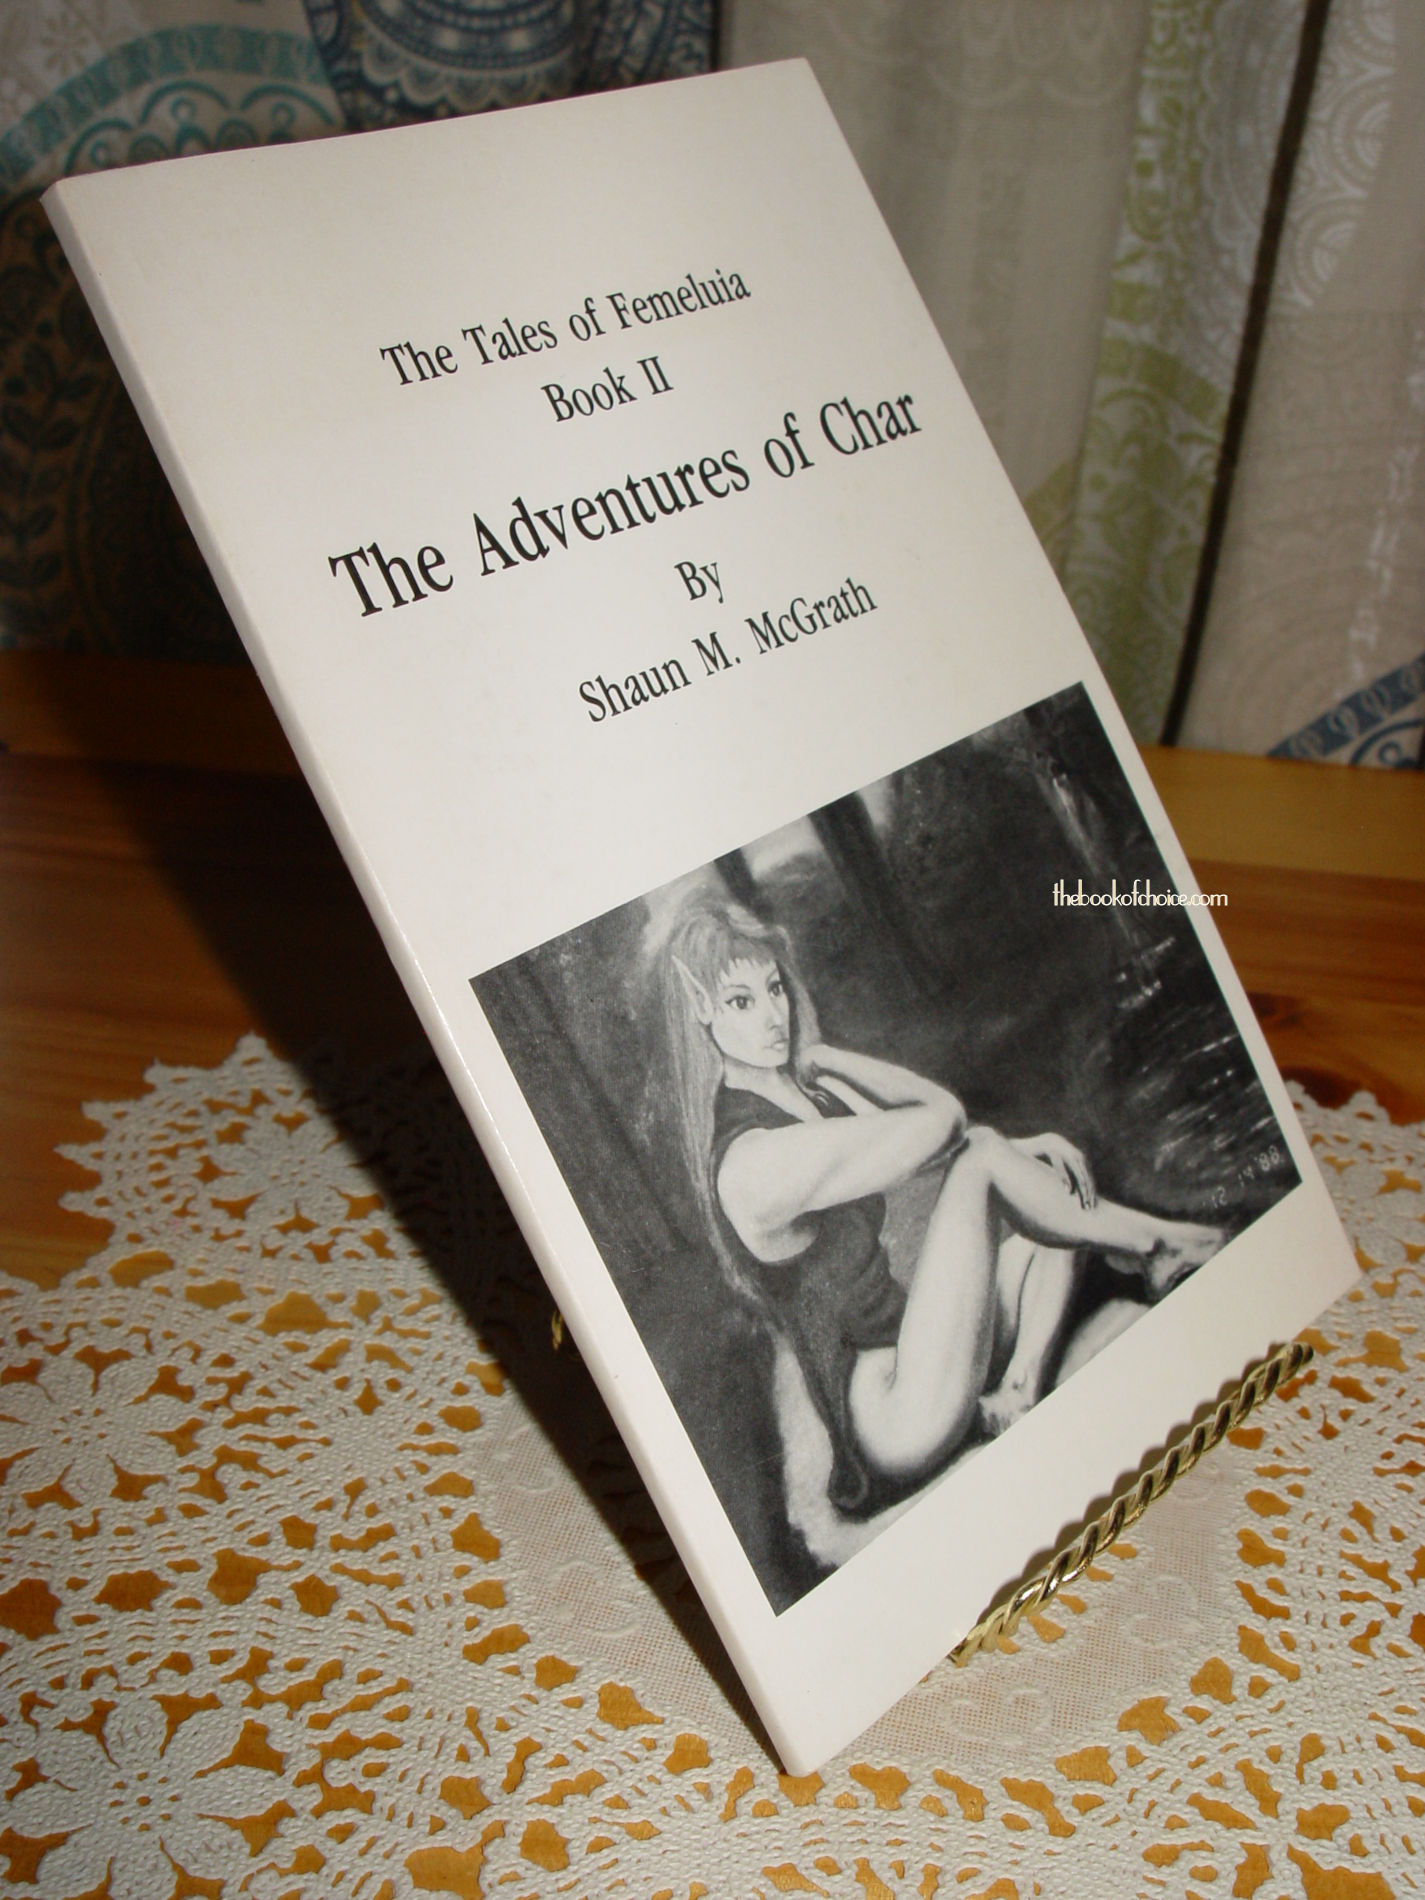 The Adventures of Char 1989; The Tales of
                        Femeluia Book II Signed Minnesota Author Shaun
                        M. McGrath